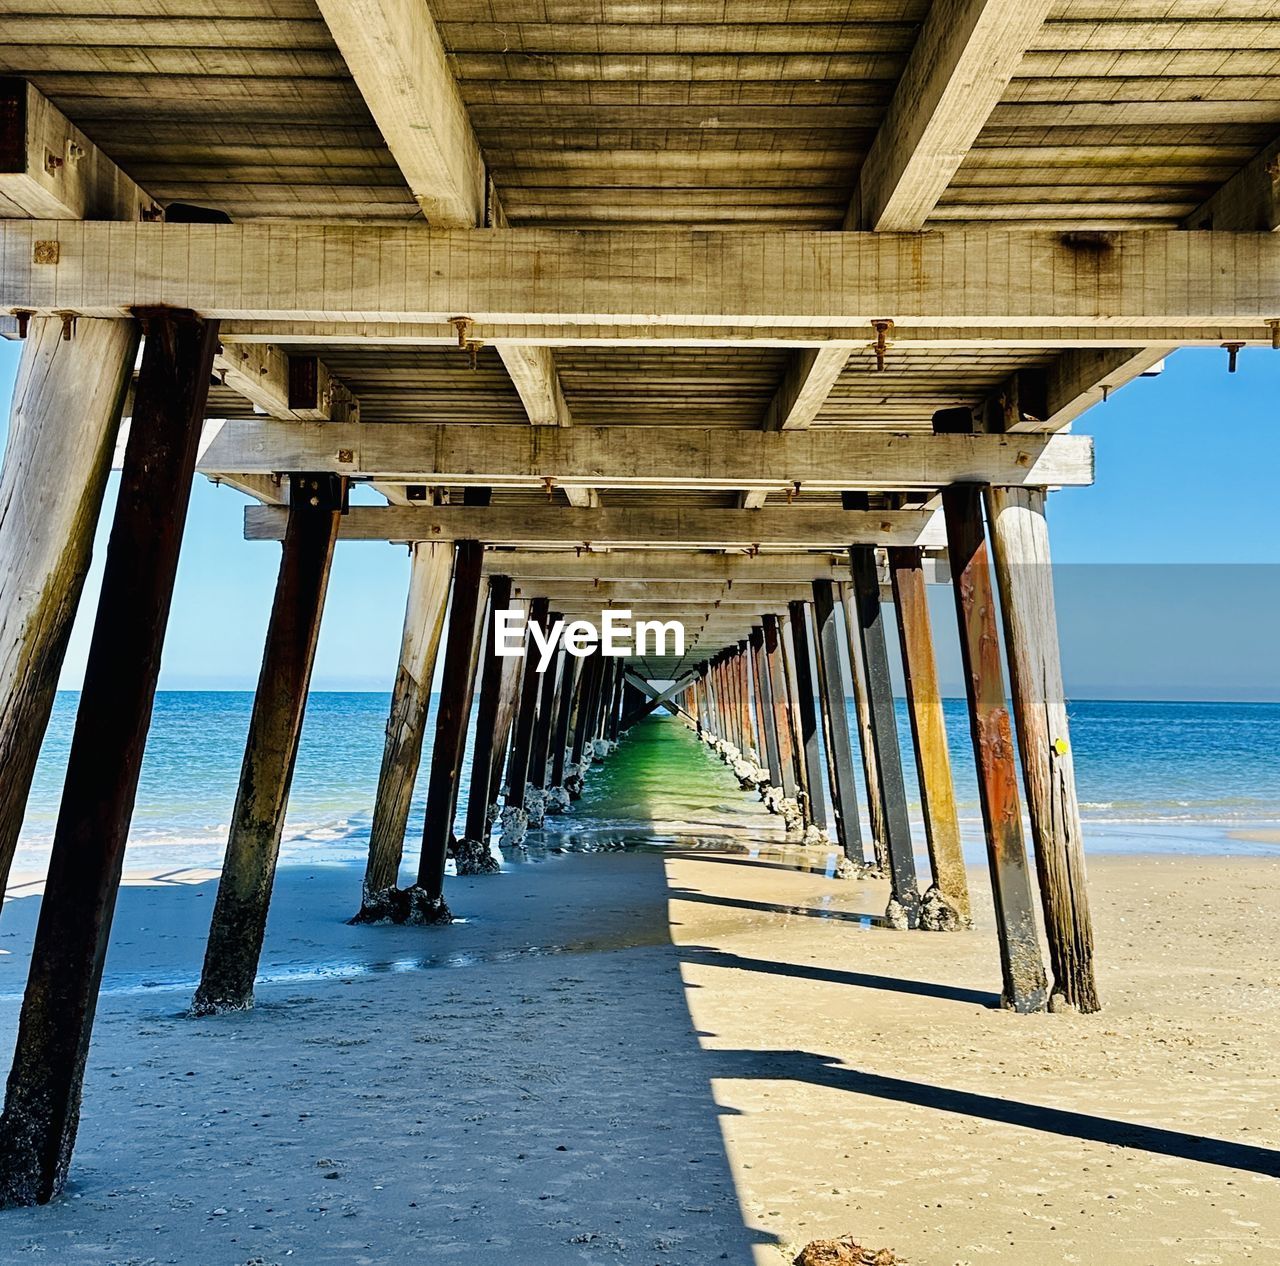 water, beach, sea, land, architecture, horizon over water, nature, built structure, sand, pier, architectural column, walkway, underneath, sky, horizon, wood, day, no people, bridge, outdoors, scenics - nature, diminishing perspective, beauty in nature, vacation, below, tranquility, transportation, the way forward, tranquil scene, in a row, sunlight